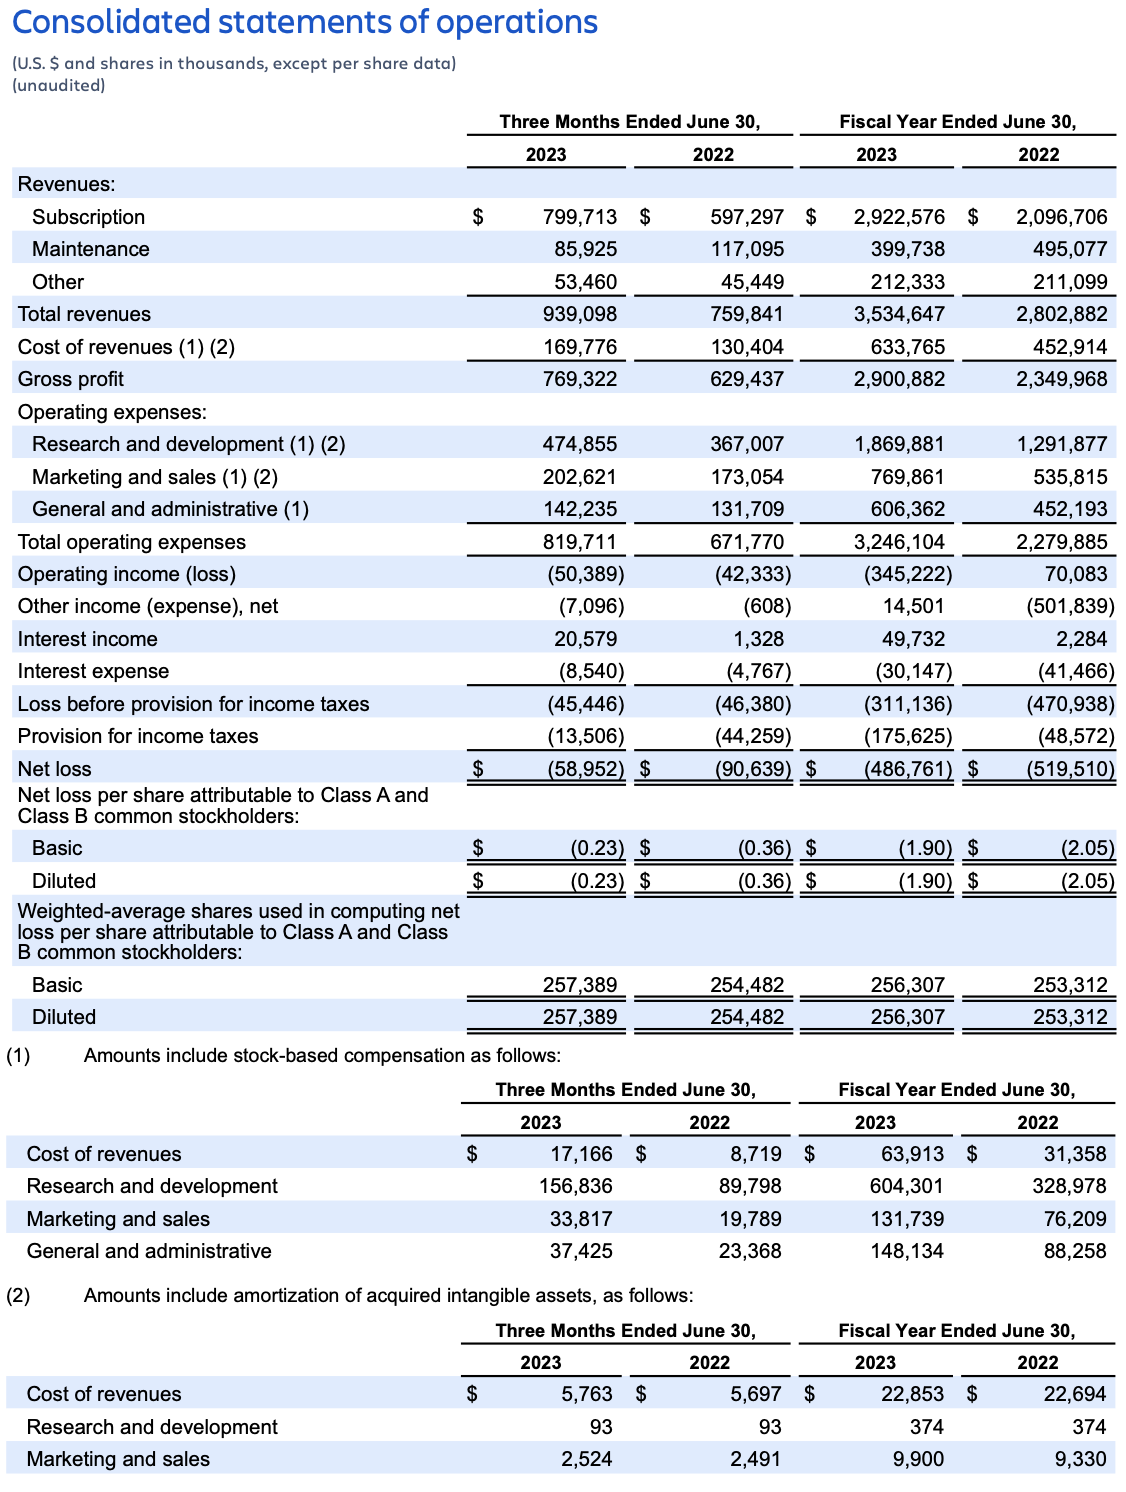 Atlassian earnings Q4FY23 – consolidated statement of operations